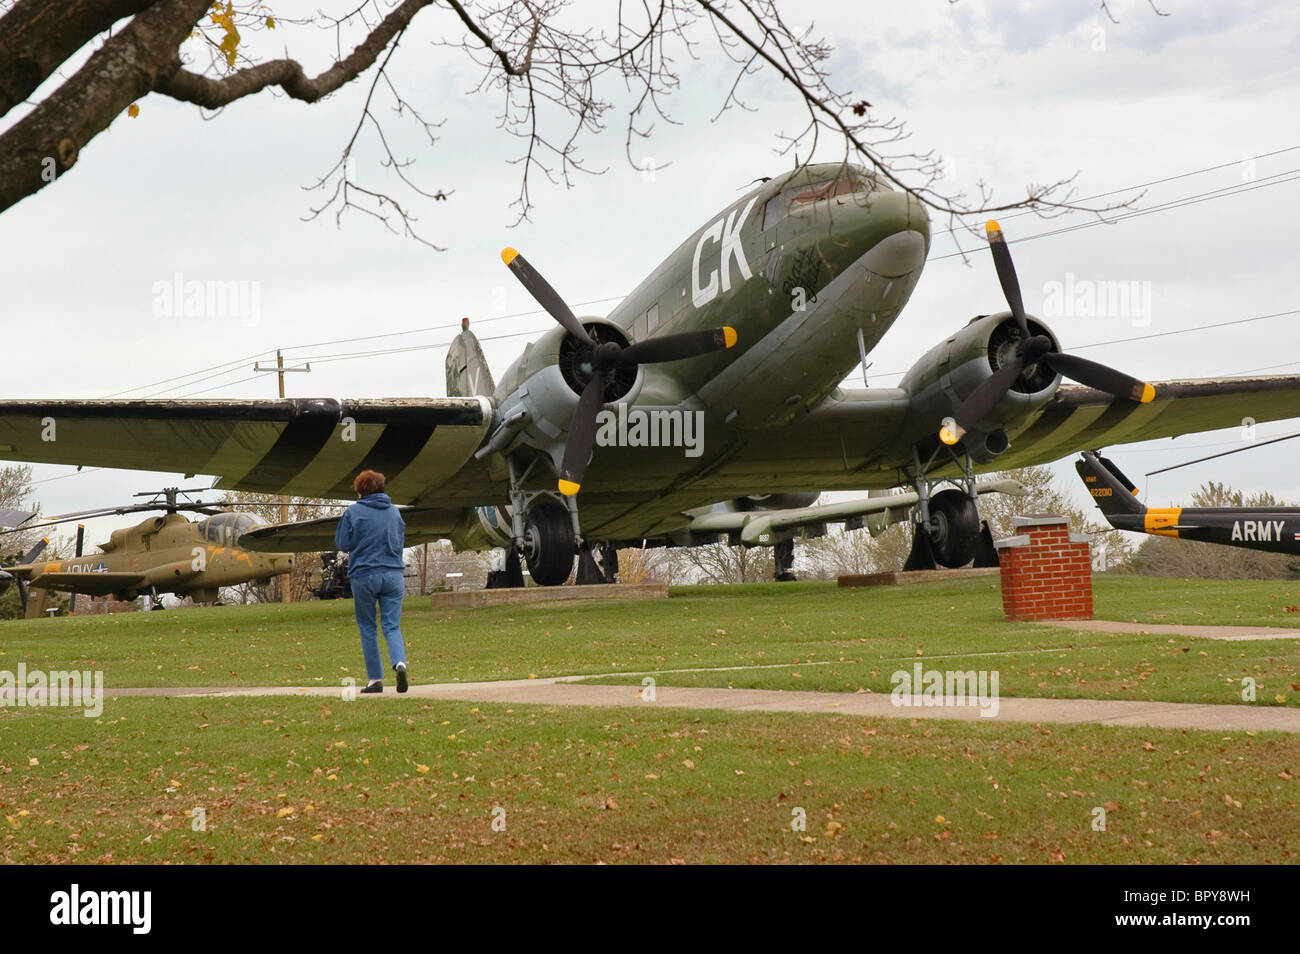 Army aircraft on display at Don F. Pratt Memorial Museum, Ft. Campbell, TN/ KY. Stock Photo